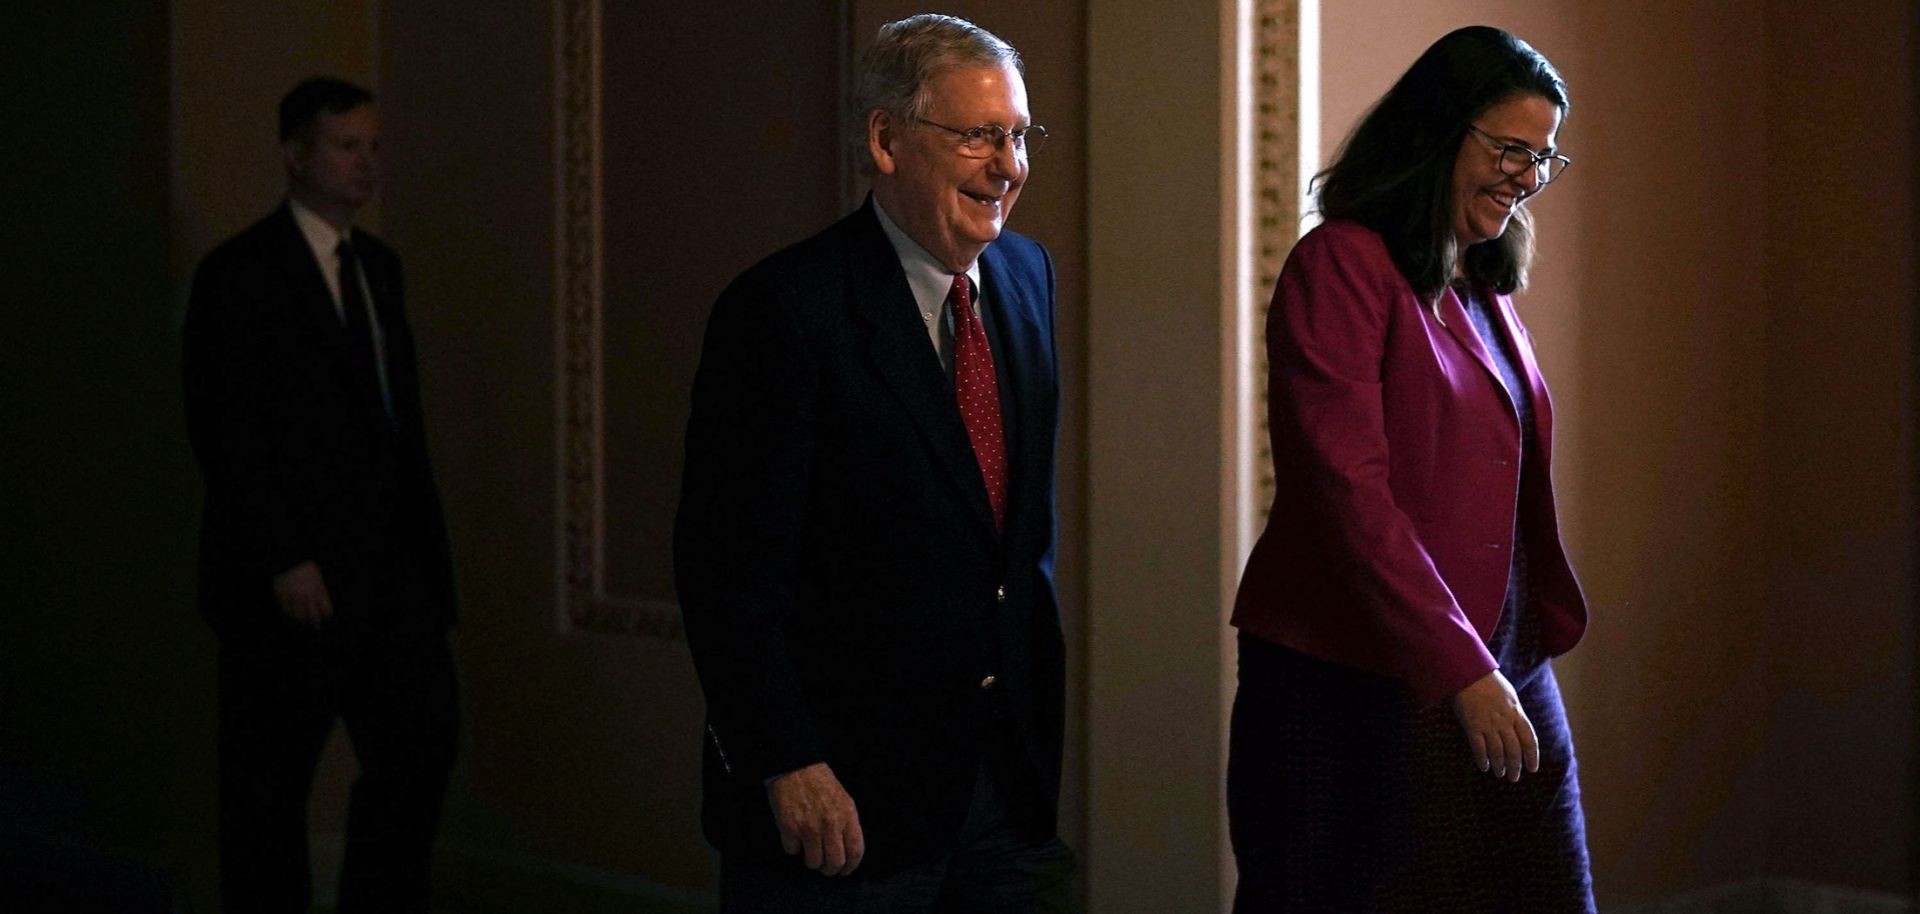 U.S. Senate Majority Leader Mitch McConnell, left, and an aide walk toward the Senate chamber in the U.S. Capitol on Feb. 12, 2018.